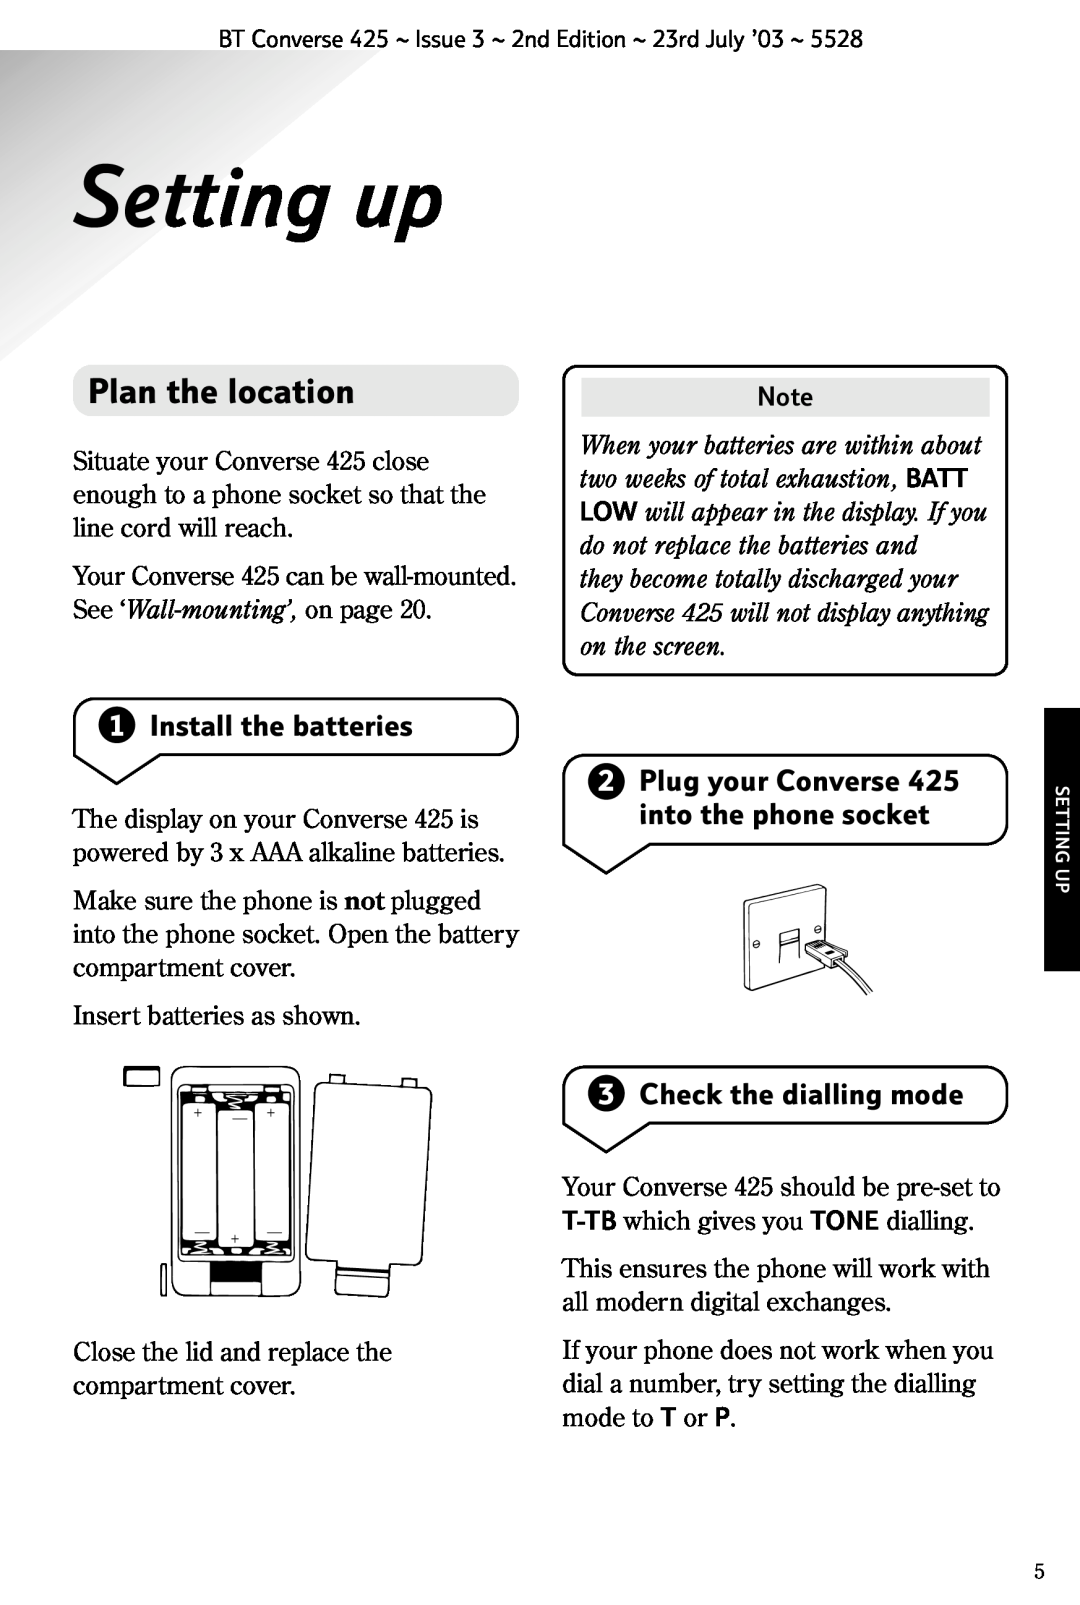 BT manual Setting up, Plan the location, Install the batteries, Plug your Converse 425 into the phone socket 